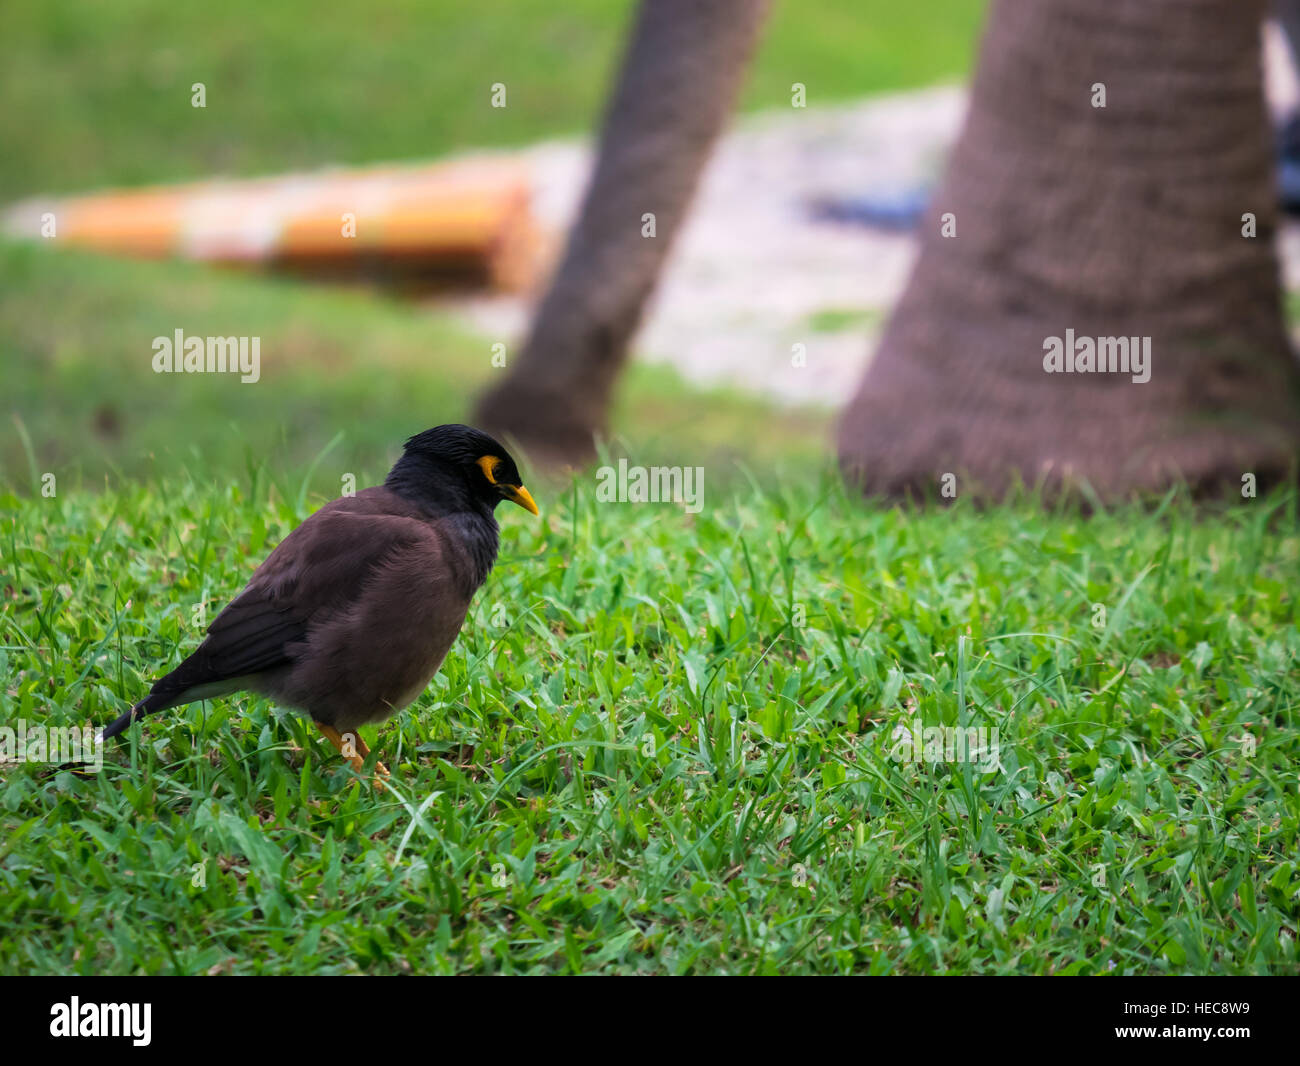 La common myna (Acridotheres tristis) herbe verte feild with copy space Banque D'Images